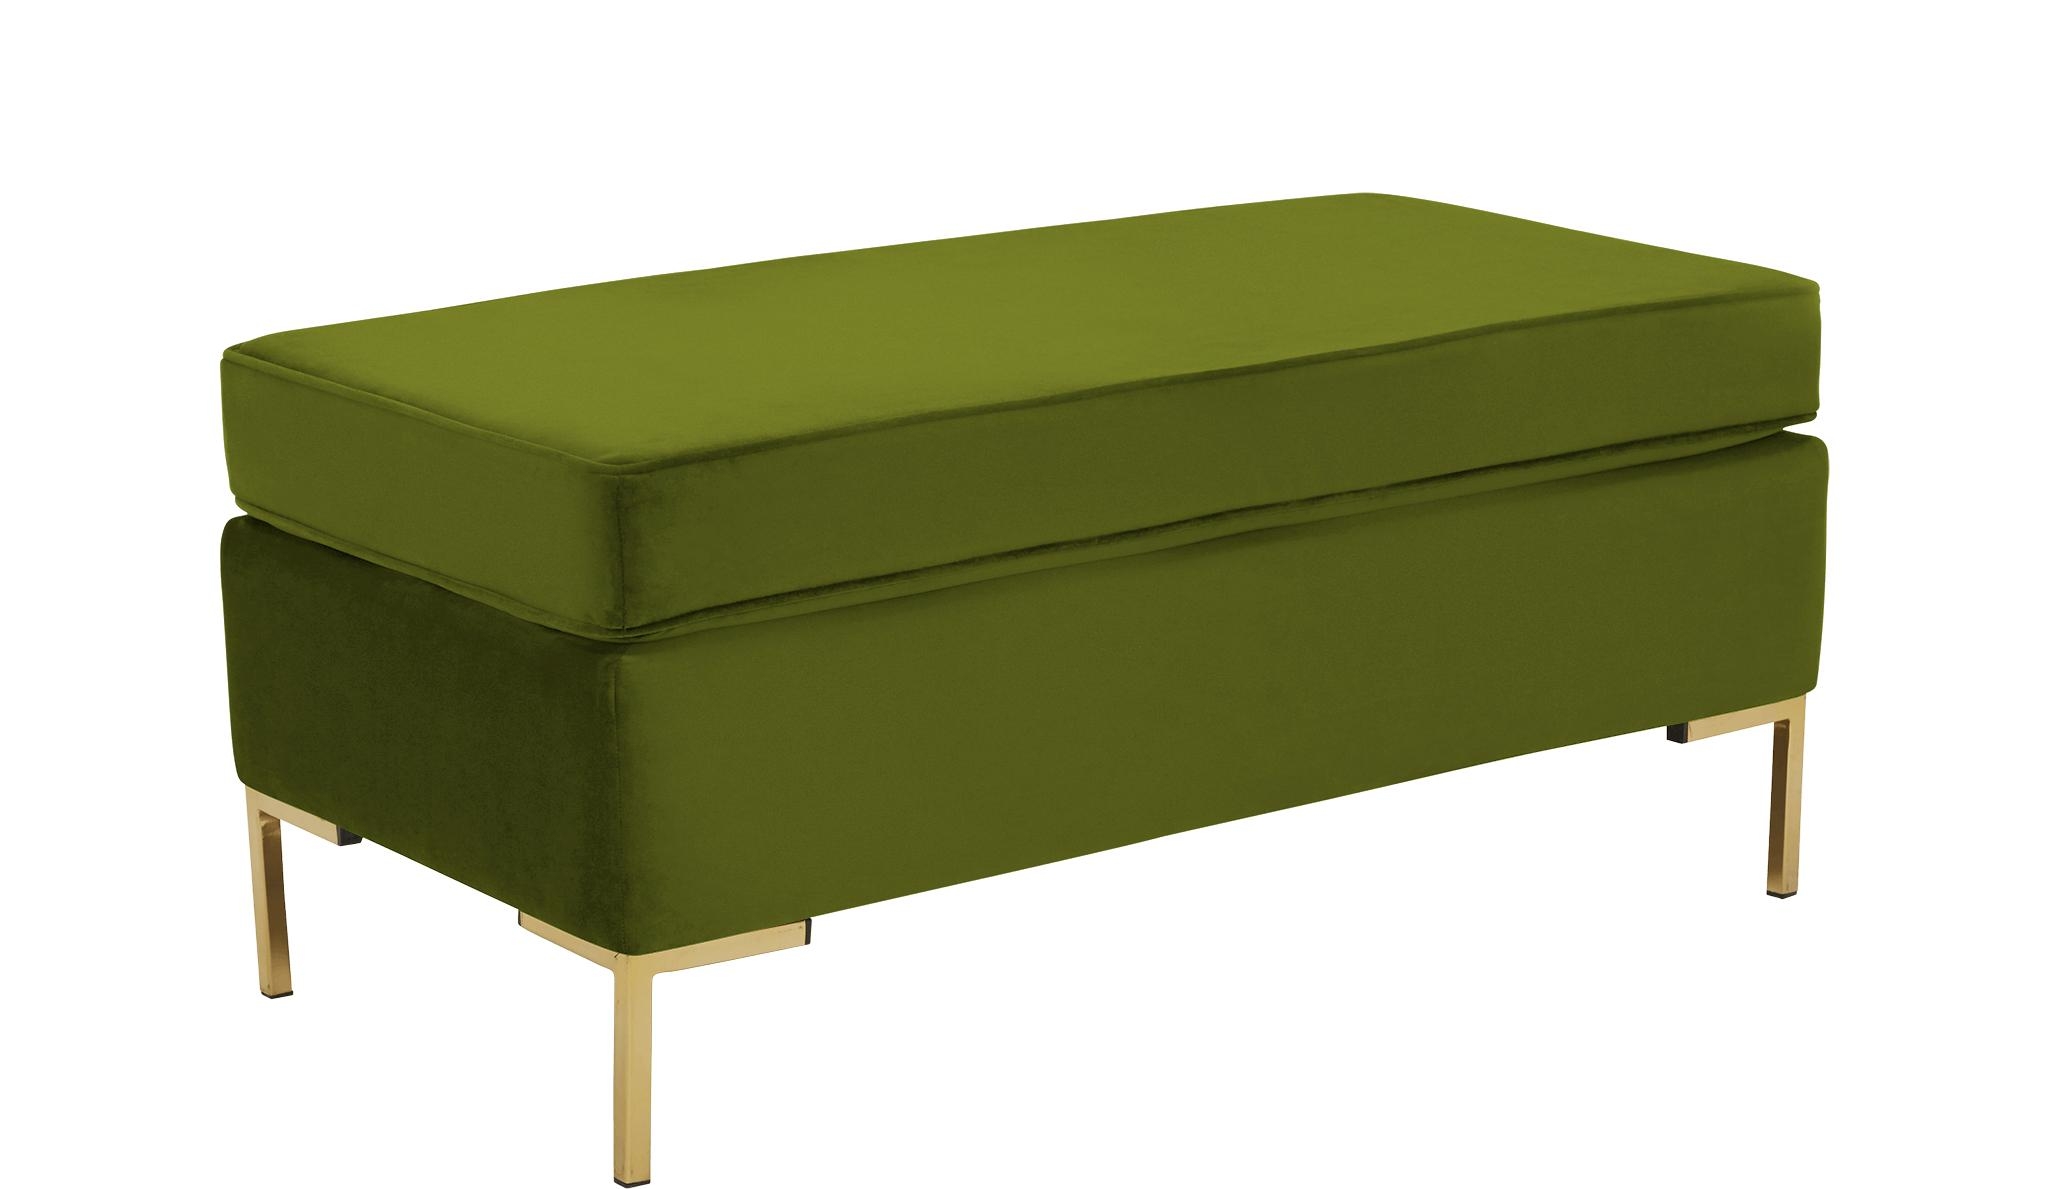 Green Dee Mid Century Modern Bench with Storage - Royale Apple - Image 1